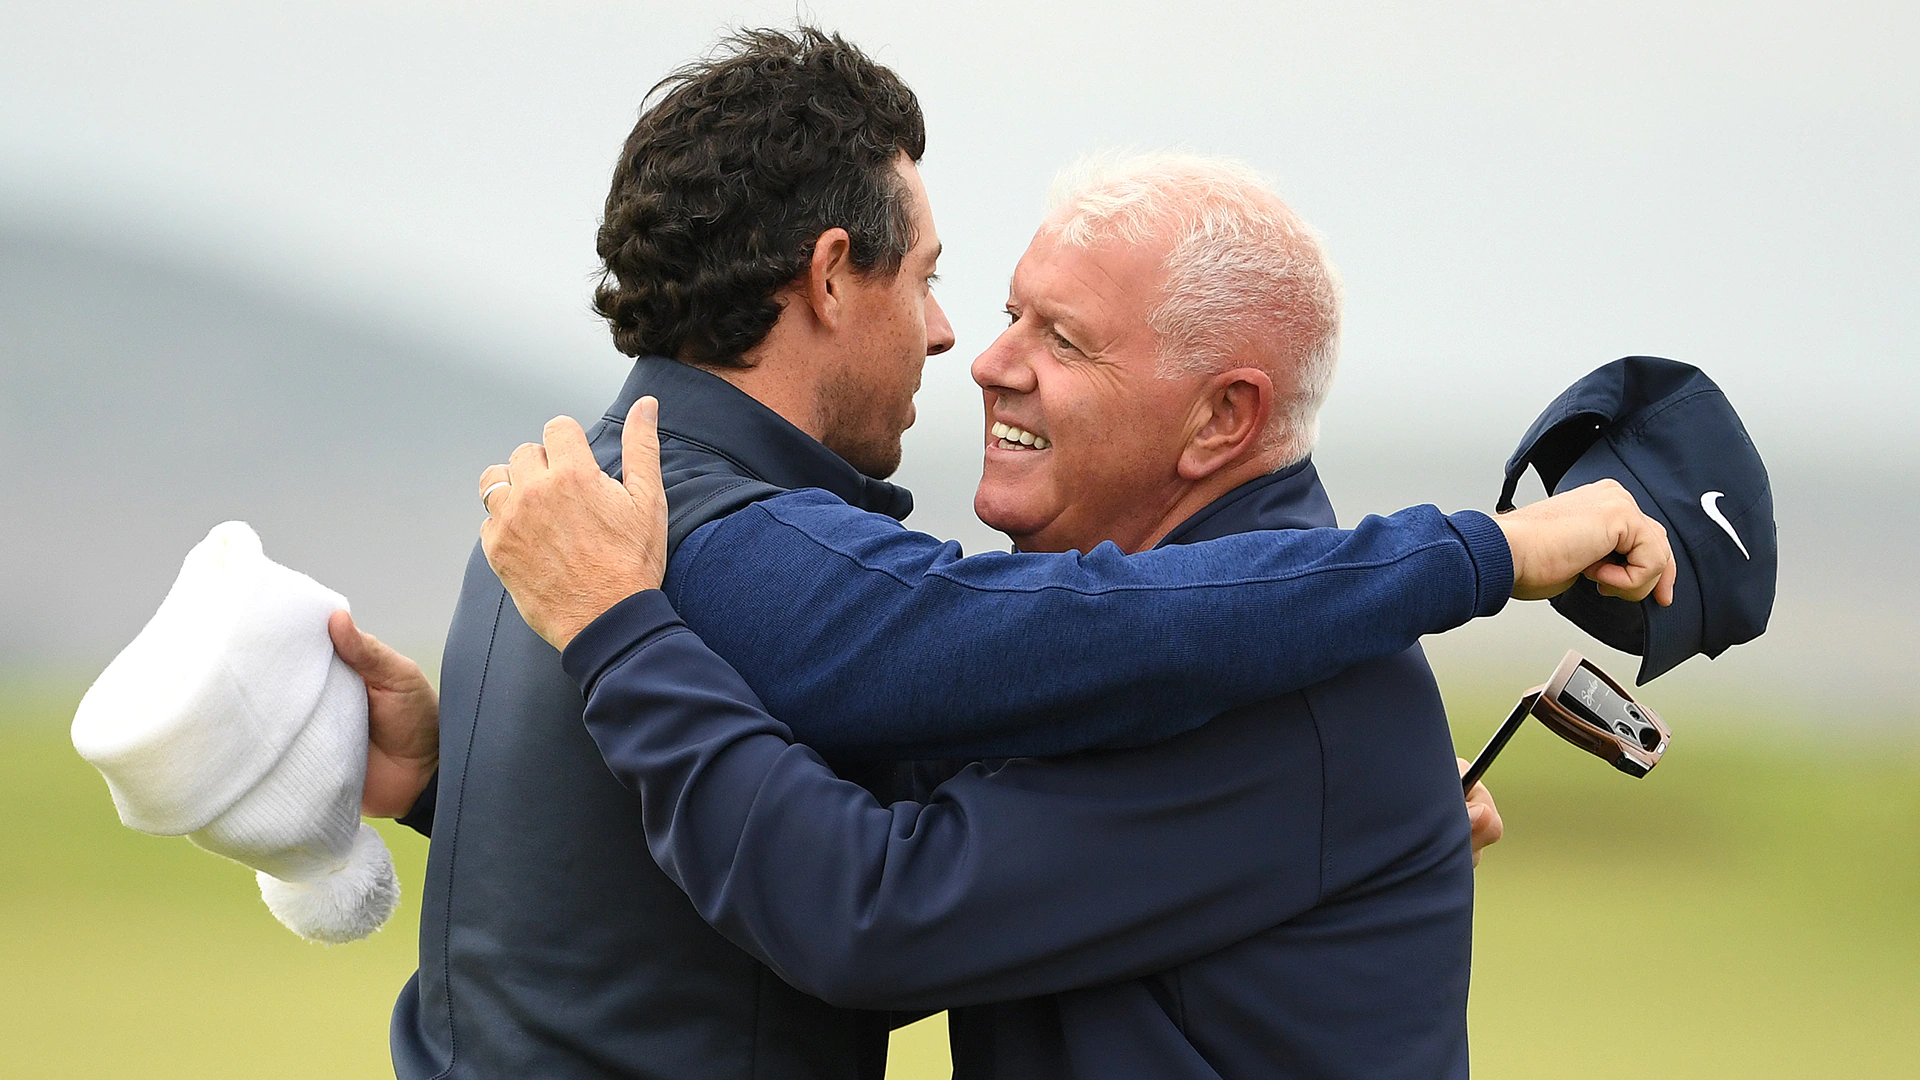 Rory McIlroy Taking on St. Andrews Again – This Time with Father Gerry